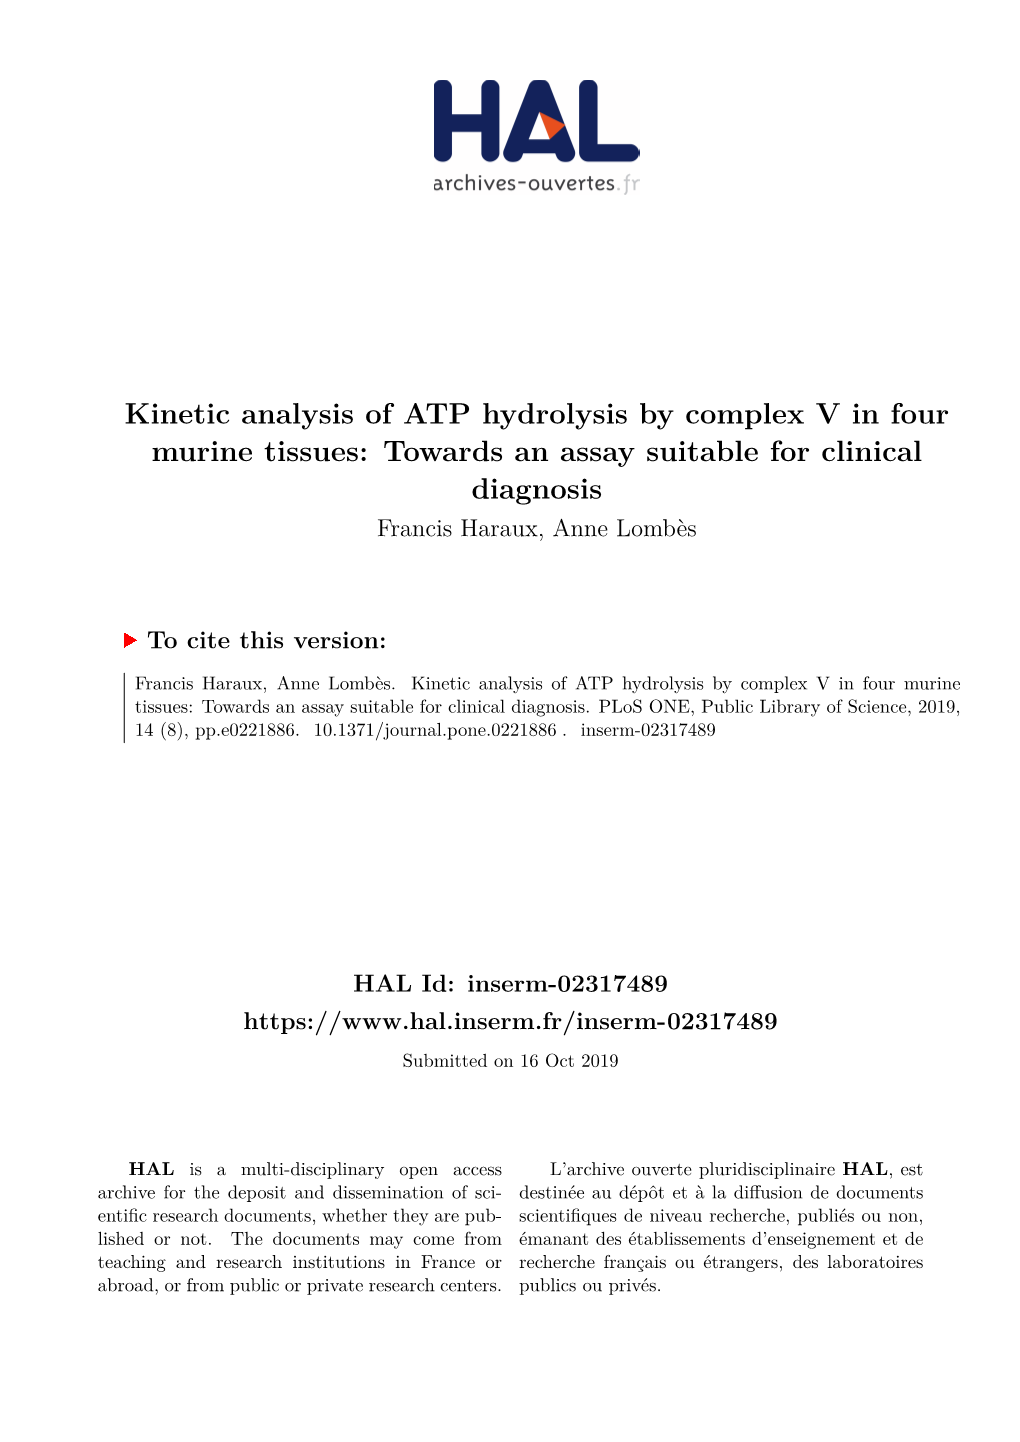 Kinetic Analysis of ATP Hydrolysis by Complex V in Four Murine Tissues: Towards an Assay Suitable for Clinical Diagnosis Francis Haraux, Anne Lombès